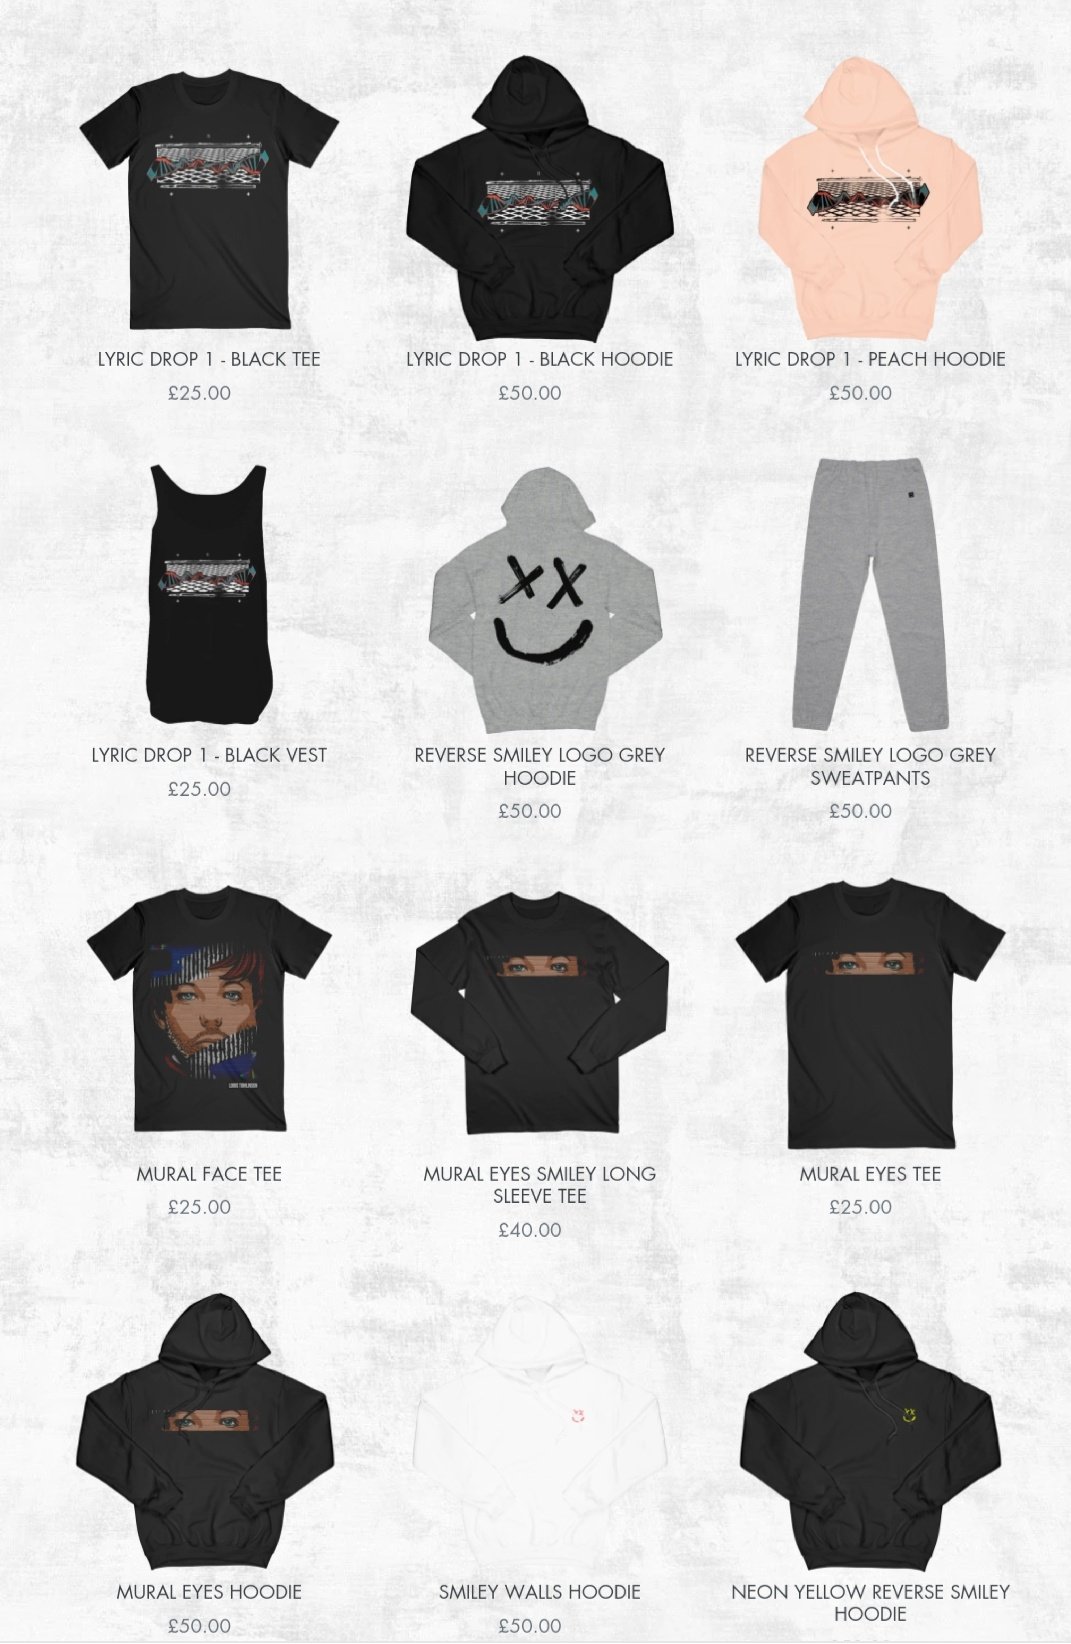 Louis Tomlinson News on X: #Update  New pieces of merch have also been  added along with the Lyric Drop collection! You can find everything, old  and new, here:   /